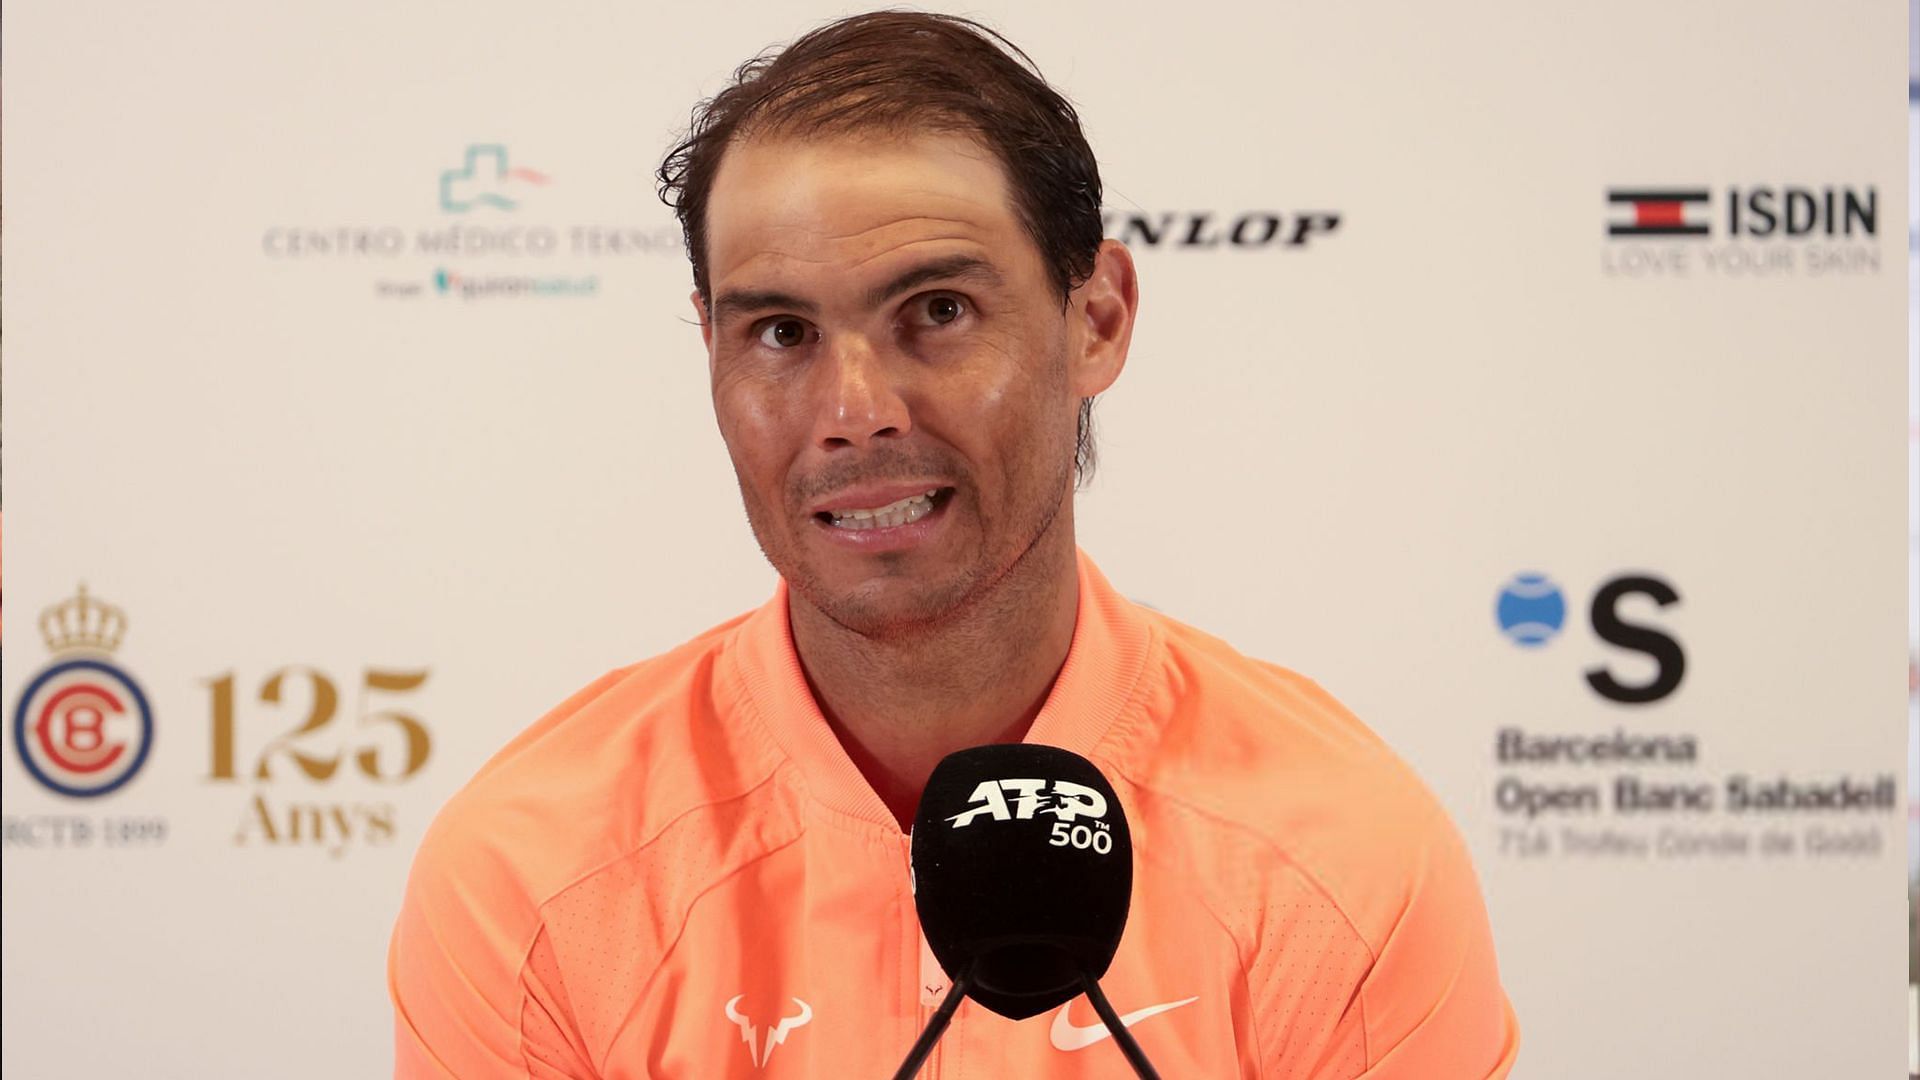 Rafael Nadal during a press conference on tour 